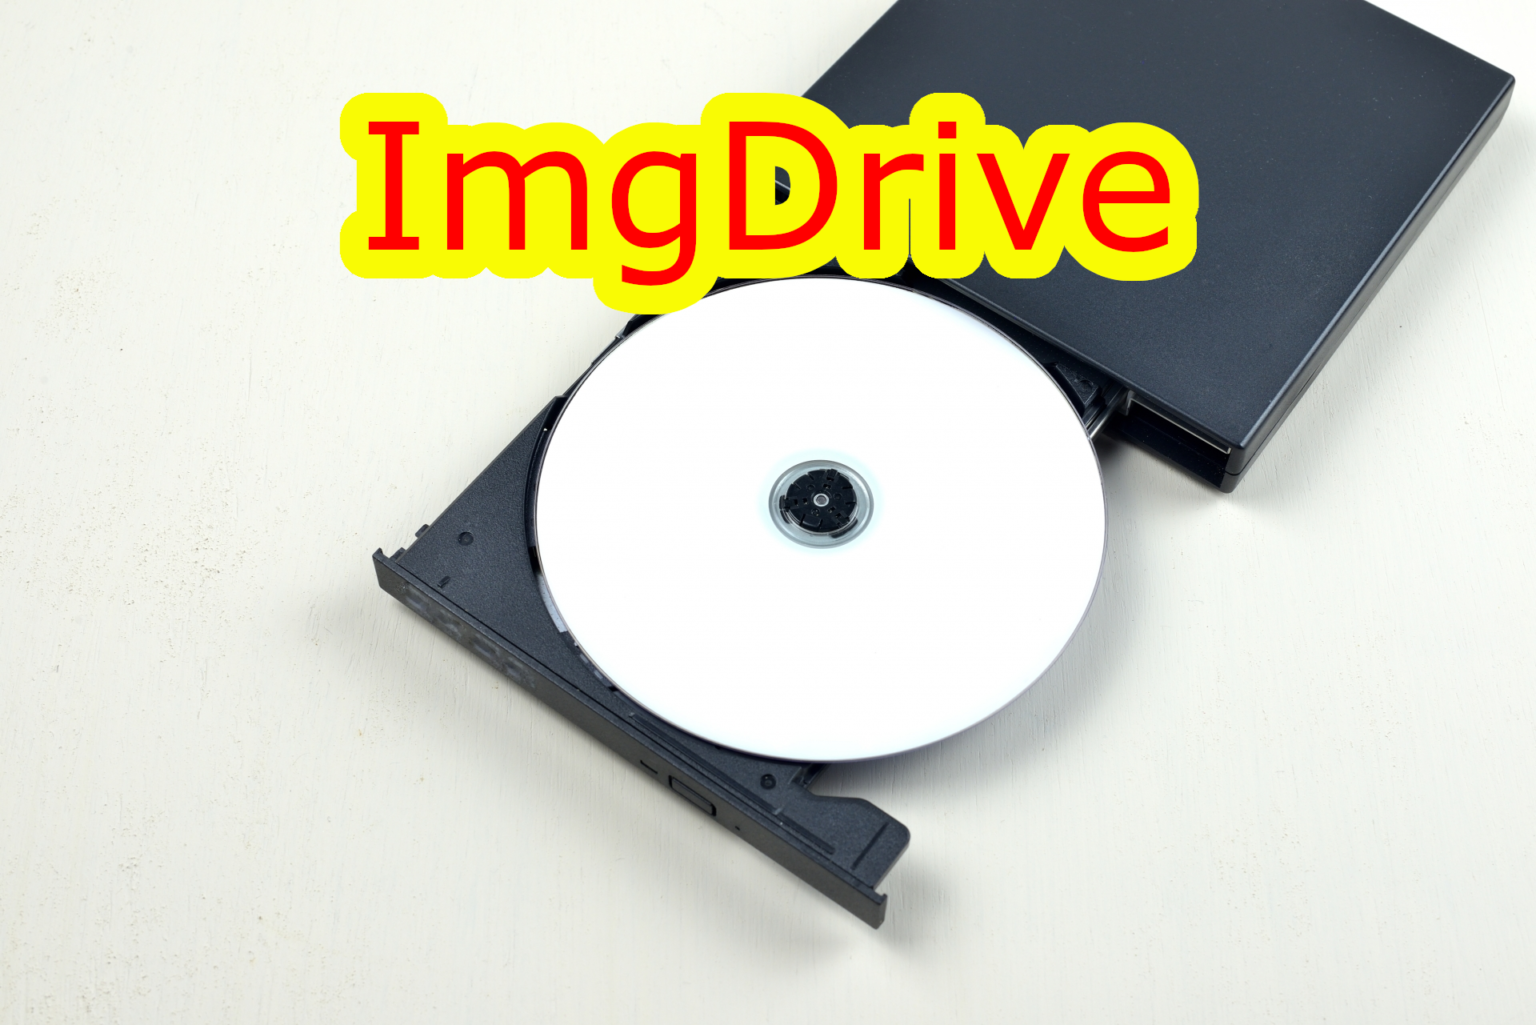 ImgDrive 2.1.2 download the new version for ipod